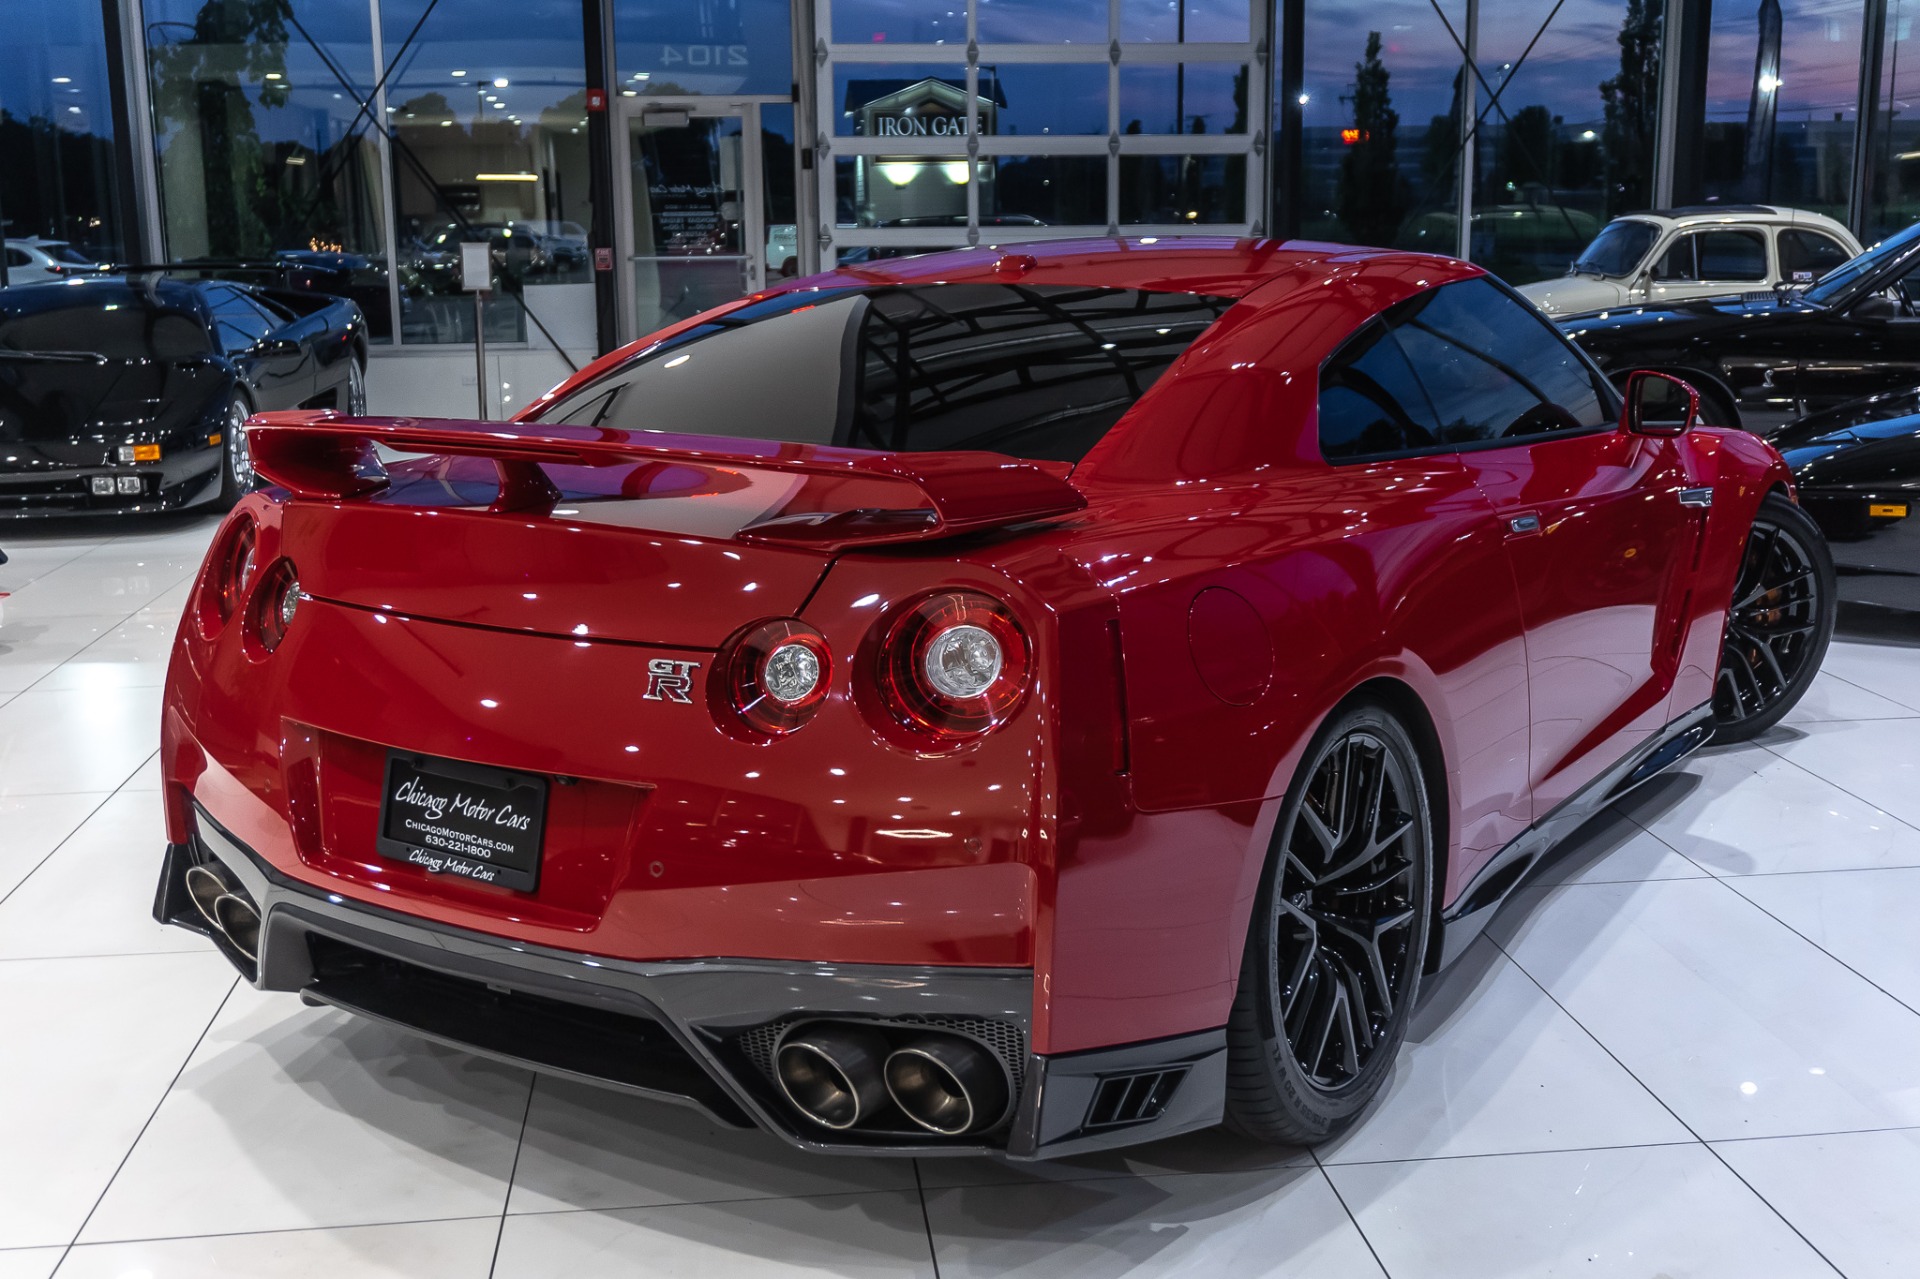 Rendering - Will the 2018 Nissan GT-R look this radical?